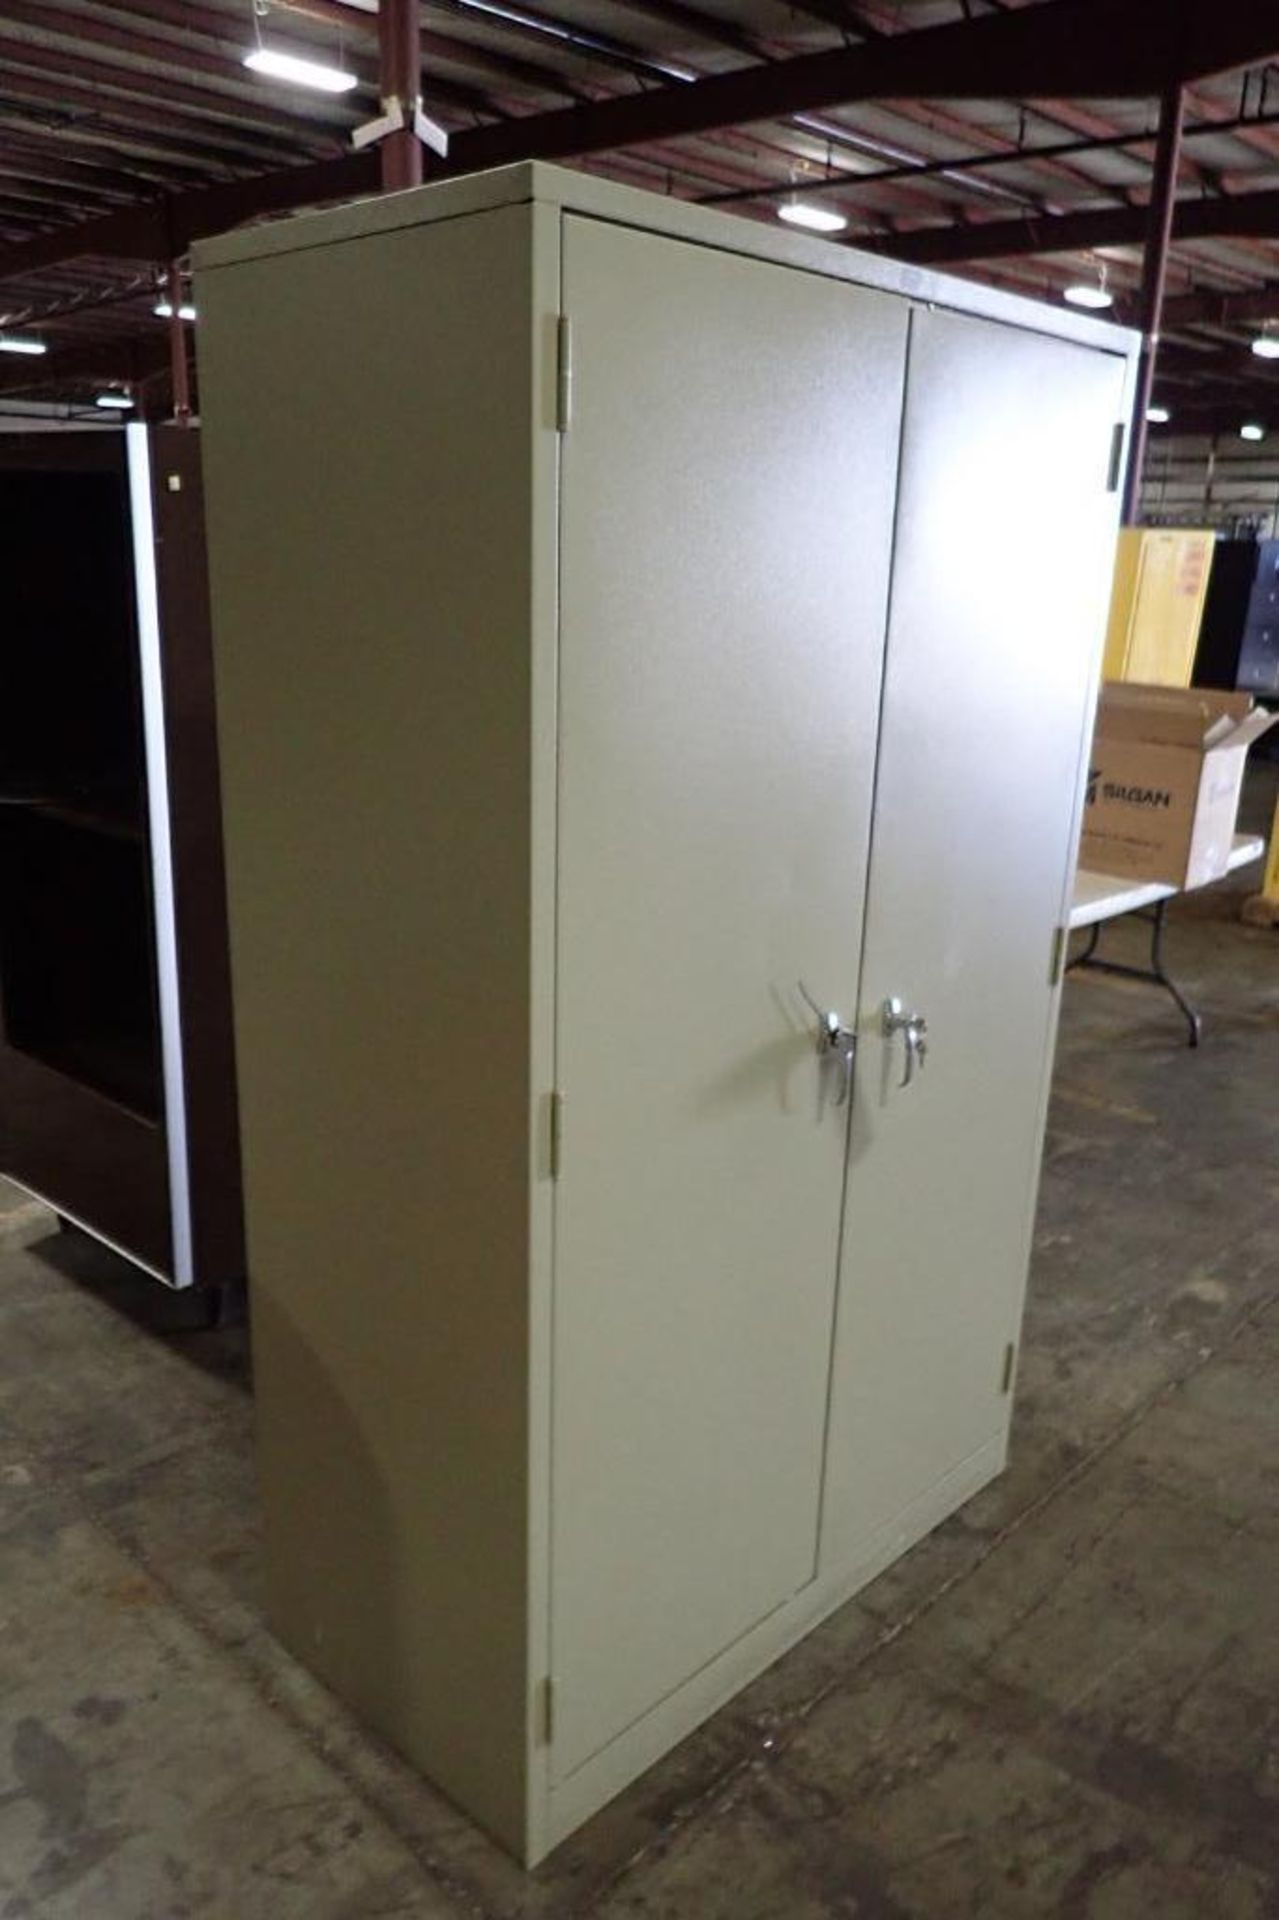 Global Industrial mild steel cabinet and contents {Located in Plymouth, IN} - Image 2 of 3